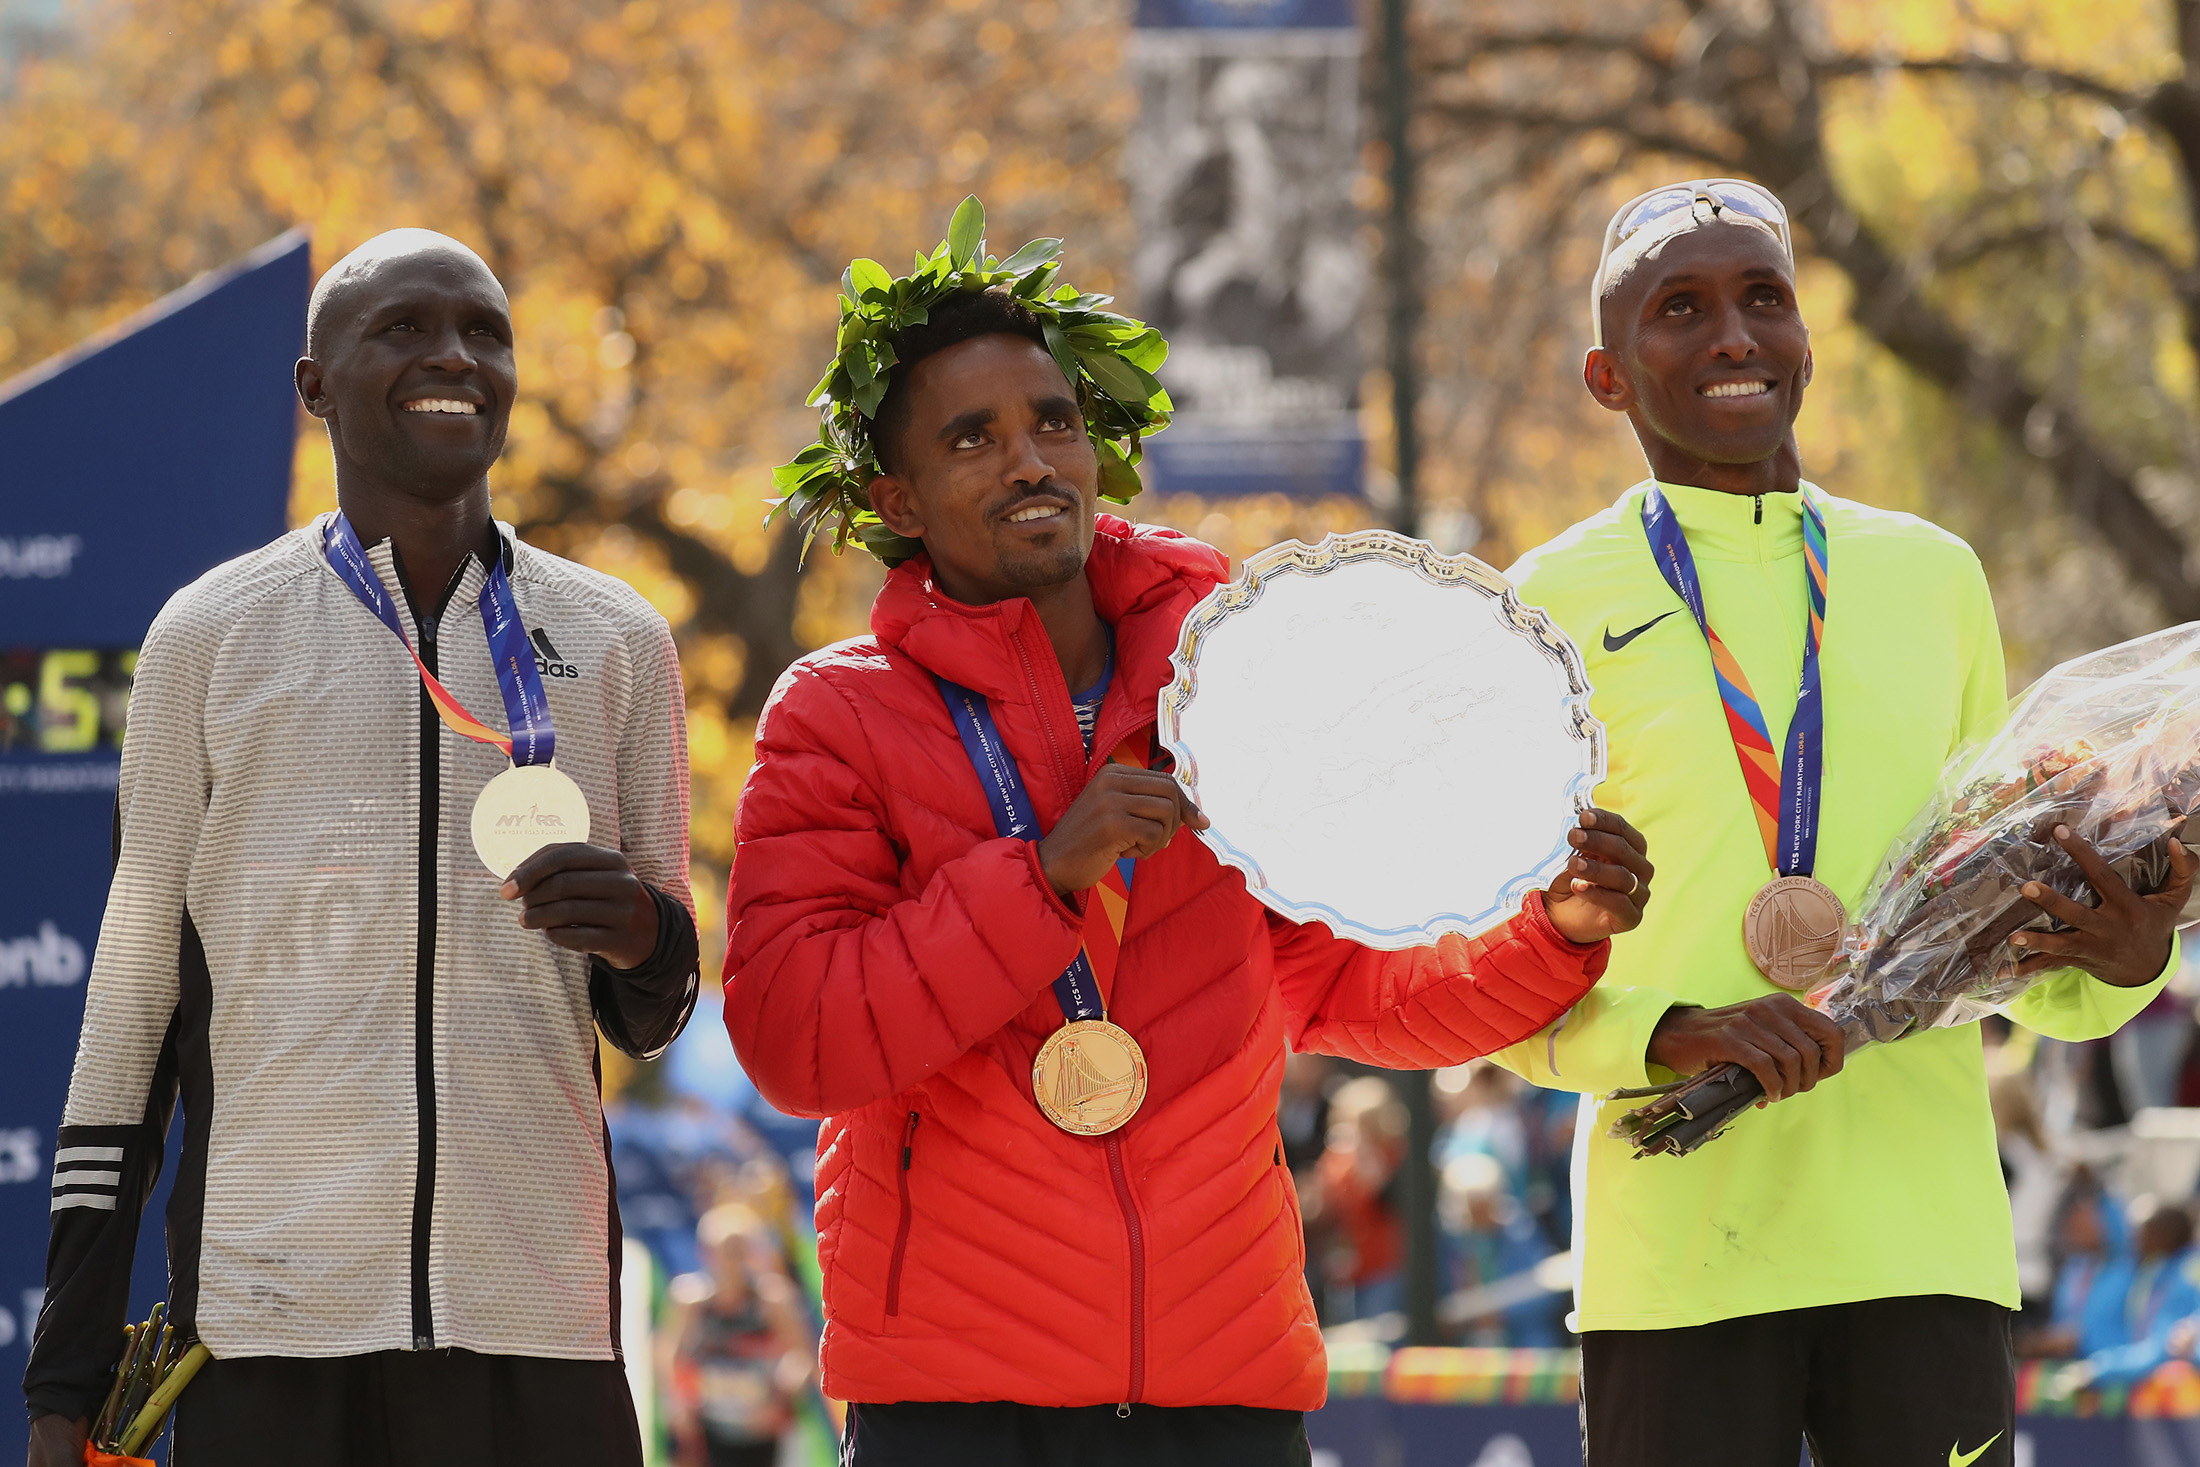 First-place finisher Ghirmay Ghebreslassie of Eritrea, center, second-place finisher Lucas Rotich of Kenya, left, and third-place finisher Abdi Abdirahman of the United States, right.